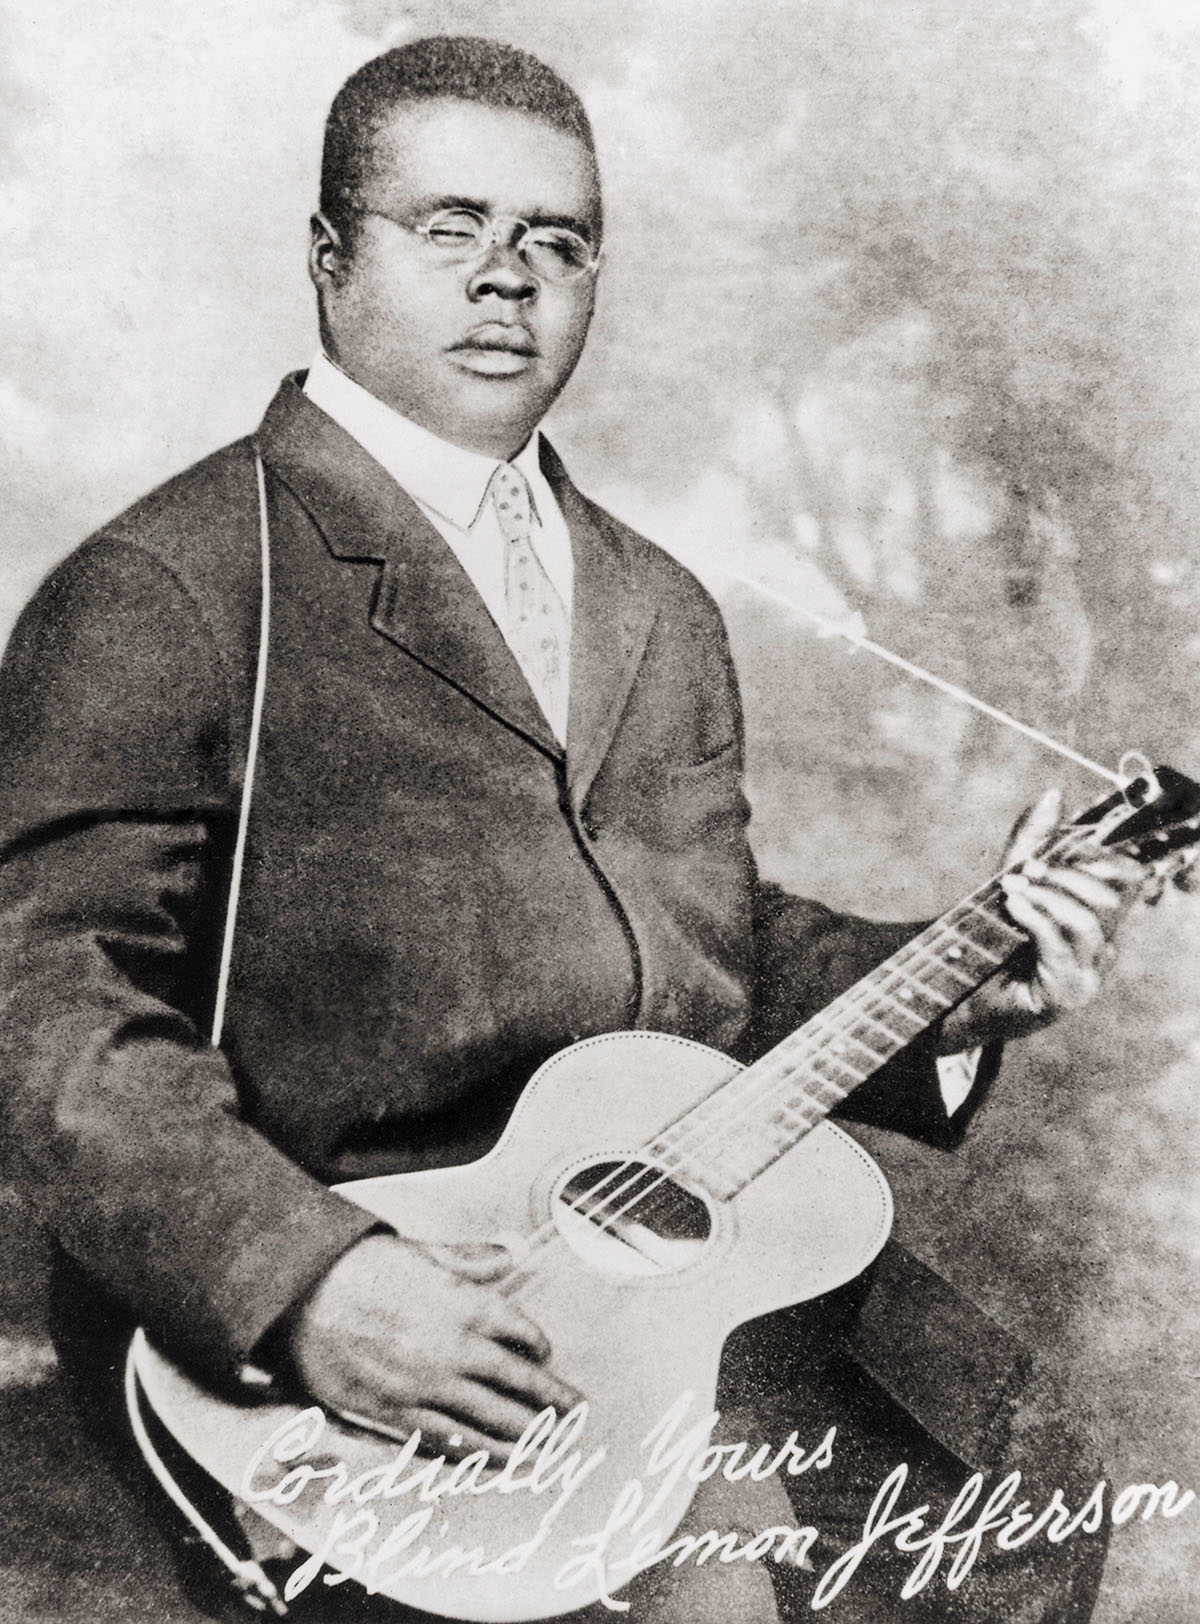 A black and white picture of a man holding a guitar